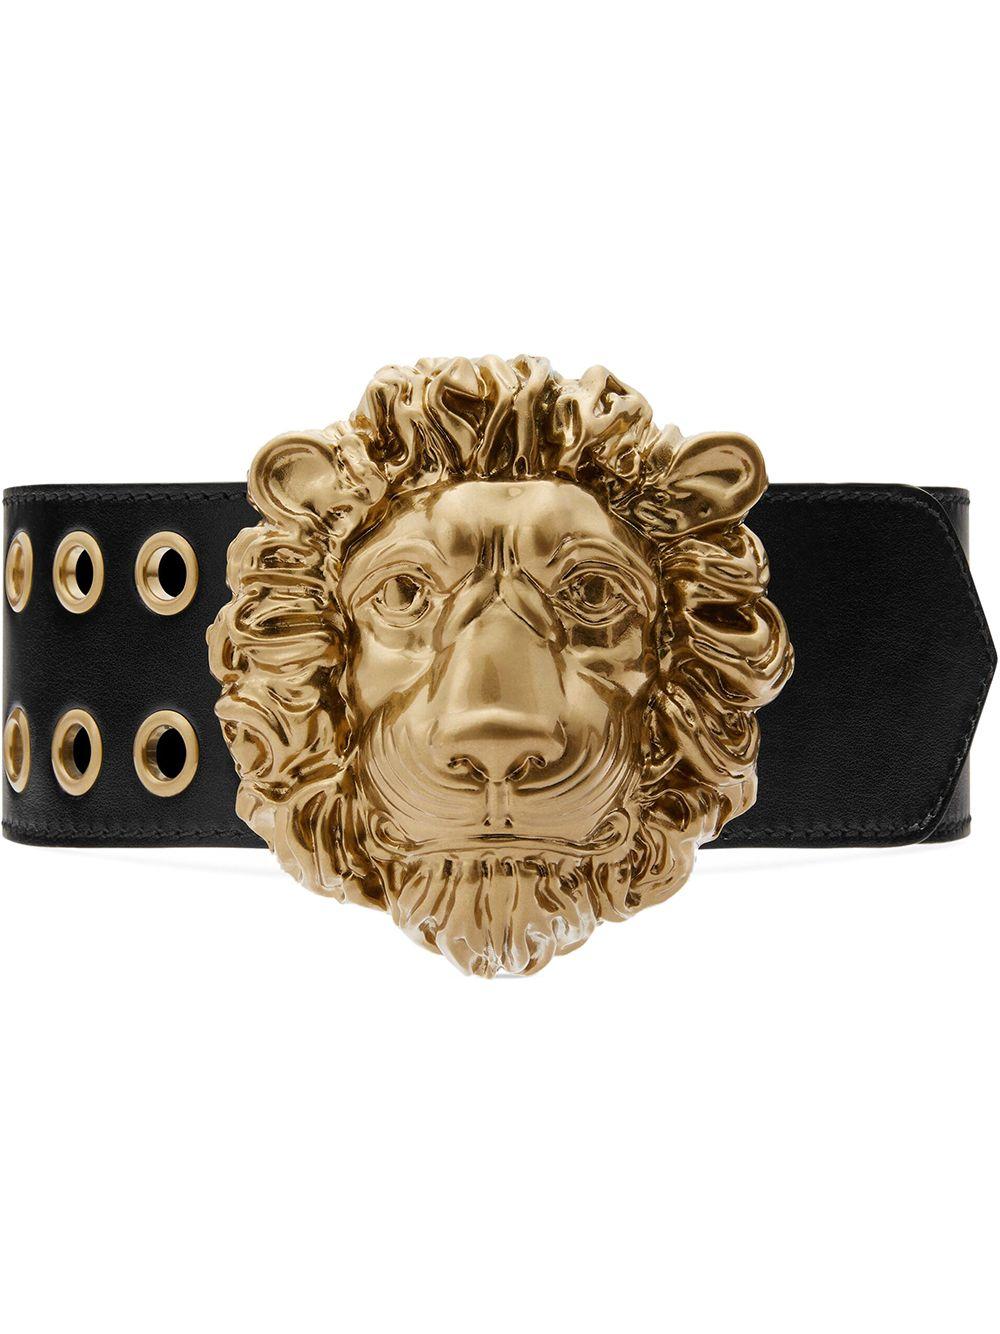 Gucci Leather Belt With Lion Head Buckle in Black | Lyst